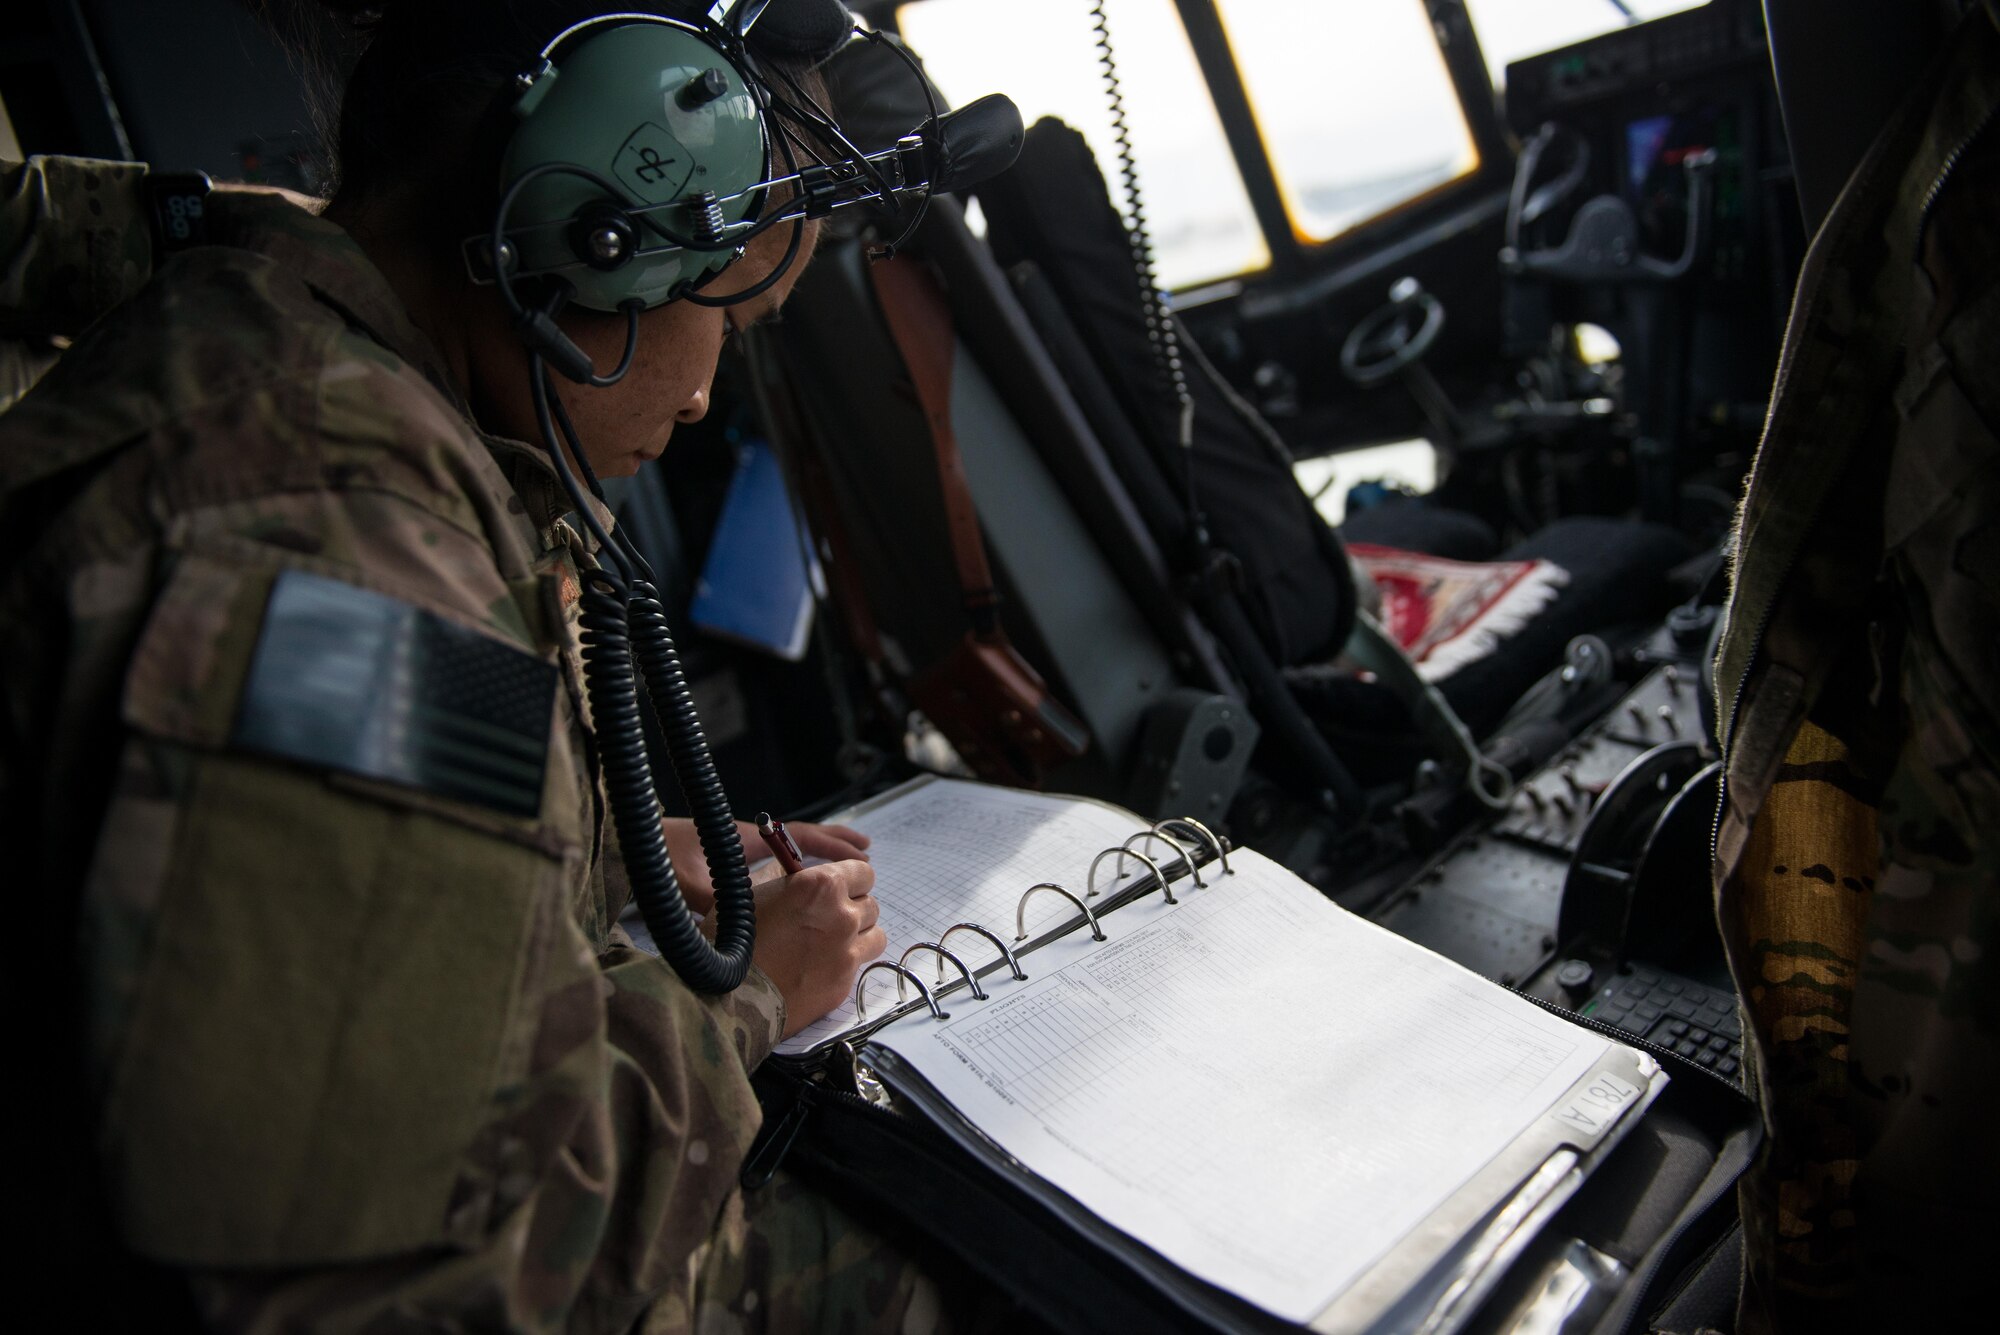 U.S. Air Force Senior Airman Mina Phouangphidok, assigned to the 455th Expeditionary Aircraft Maintenance Squadron, performs post flight checks on a C-130J Super Hercules aircraft on the flight line at Bagram Airfield, Afghanistan, May 5, 2015.  The 455th EAMXS ensure Super Hercules on Bagram are prepared for flight and return them to a mission-ready state once they land. (U.S. Air Force photo by Tech. Sgt. Joseph Swafford/Released) 